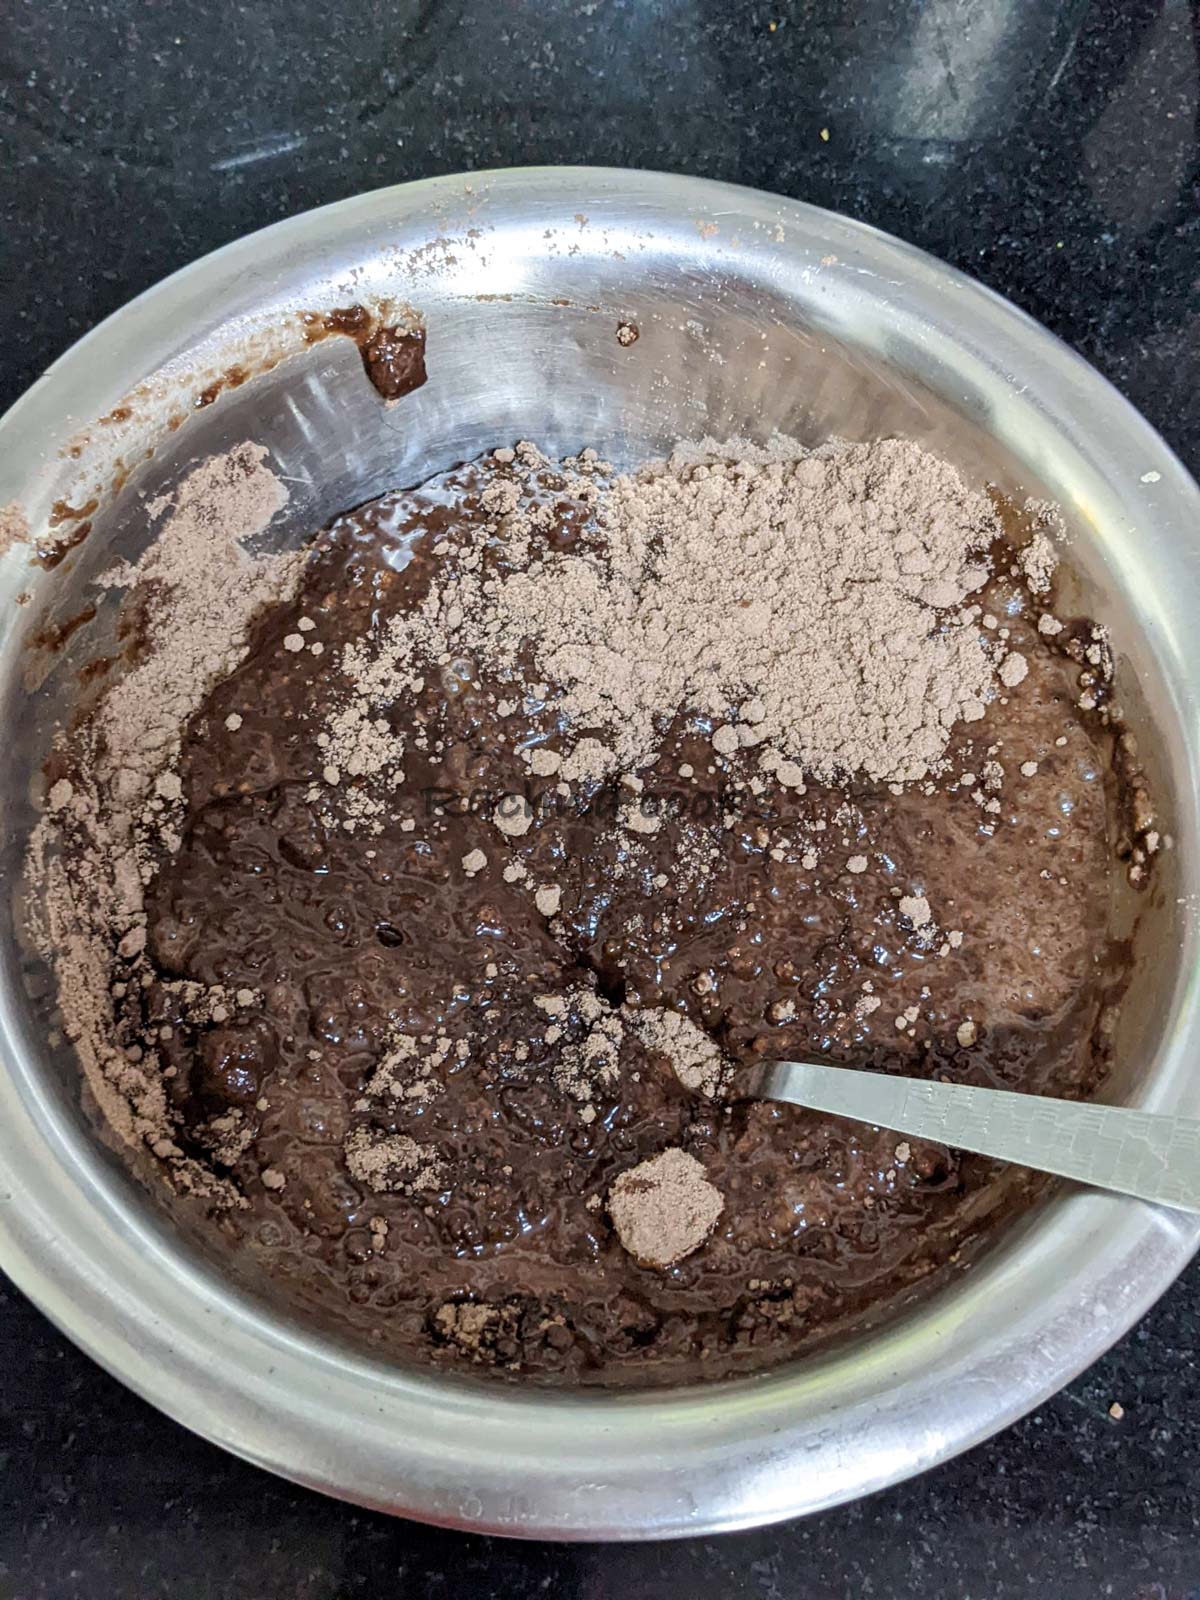 Mixing cake batter in a steel bowl